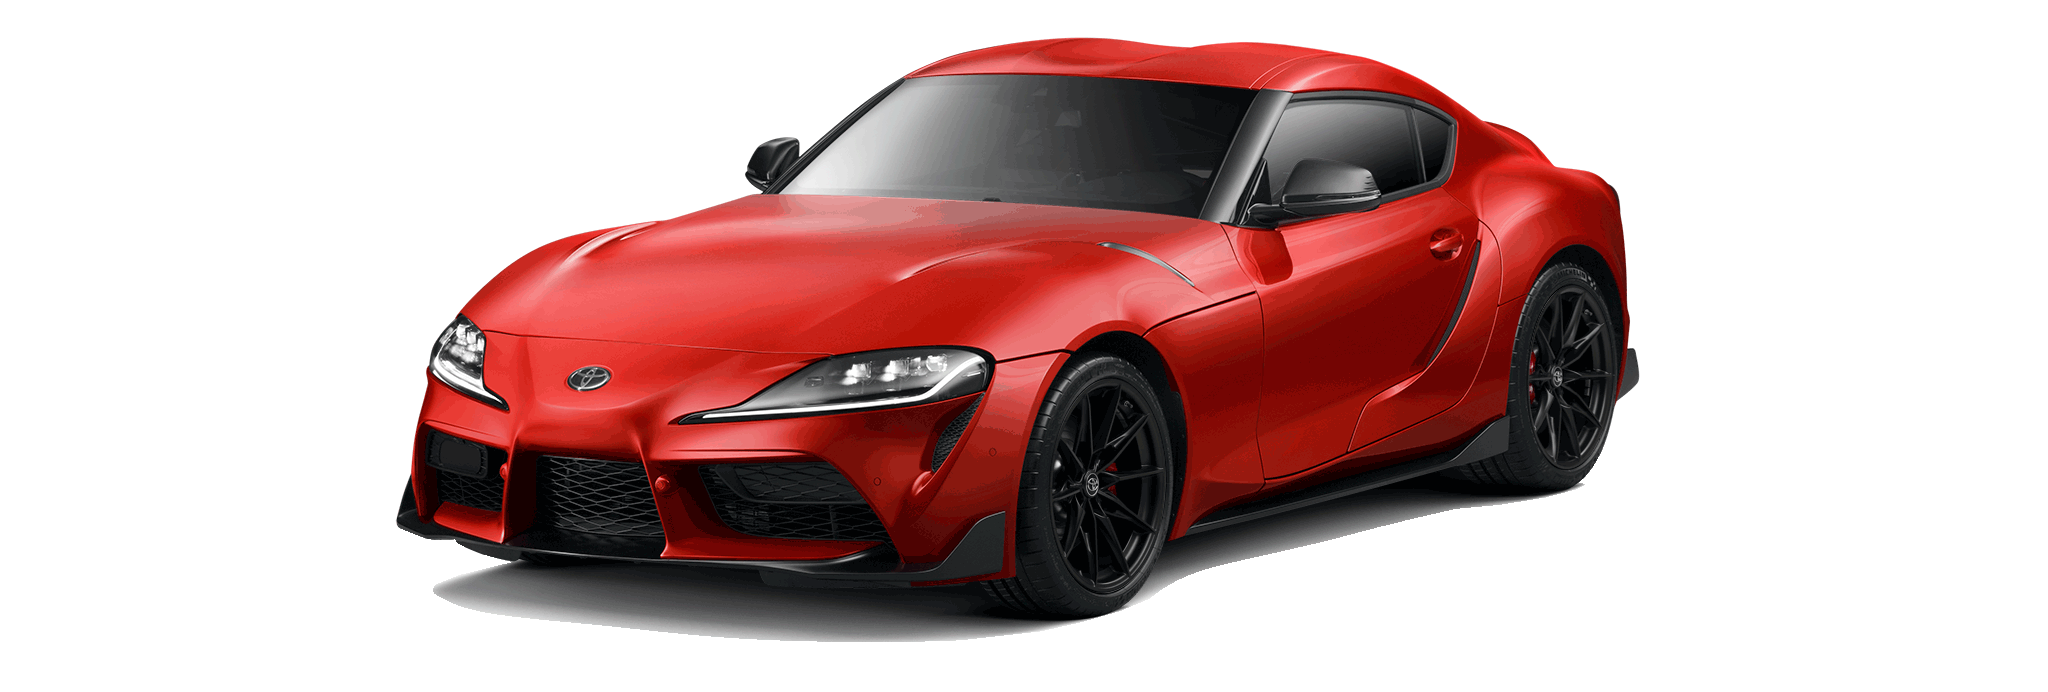 toyota supra prominence red 2020